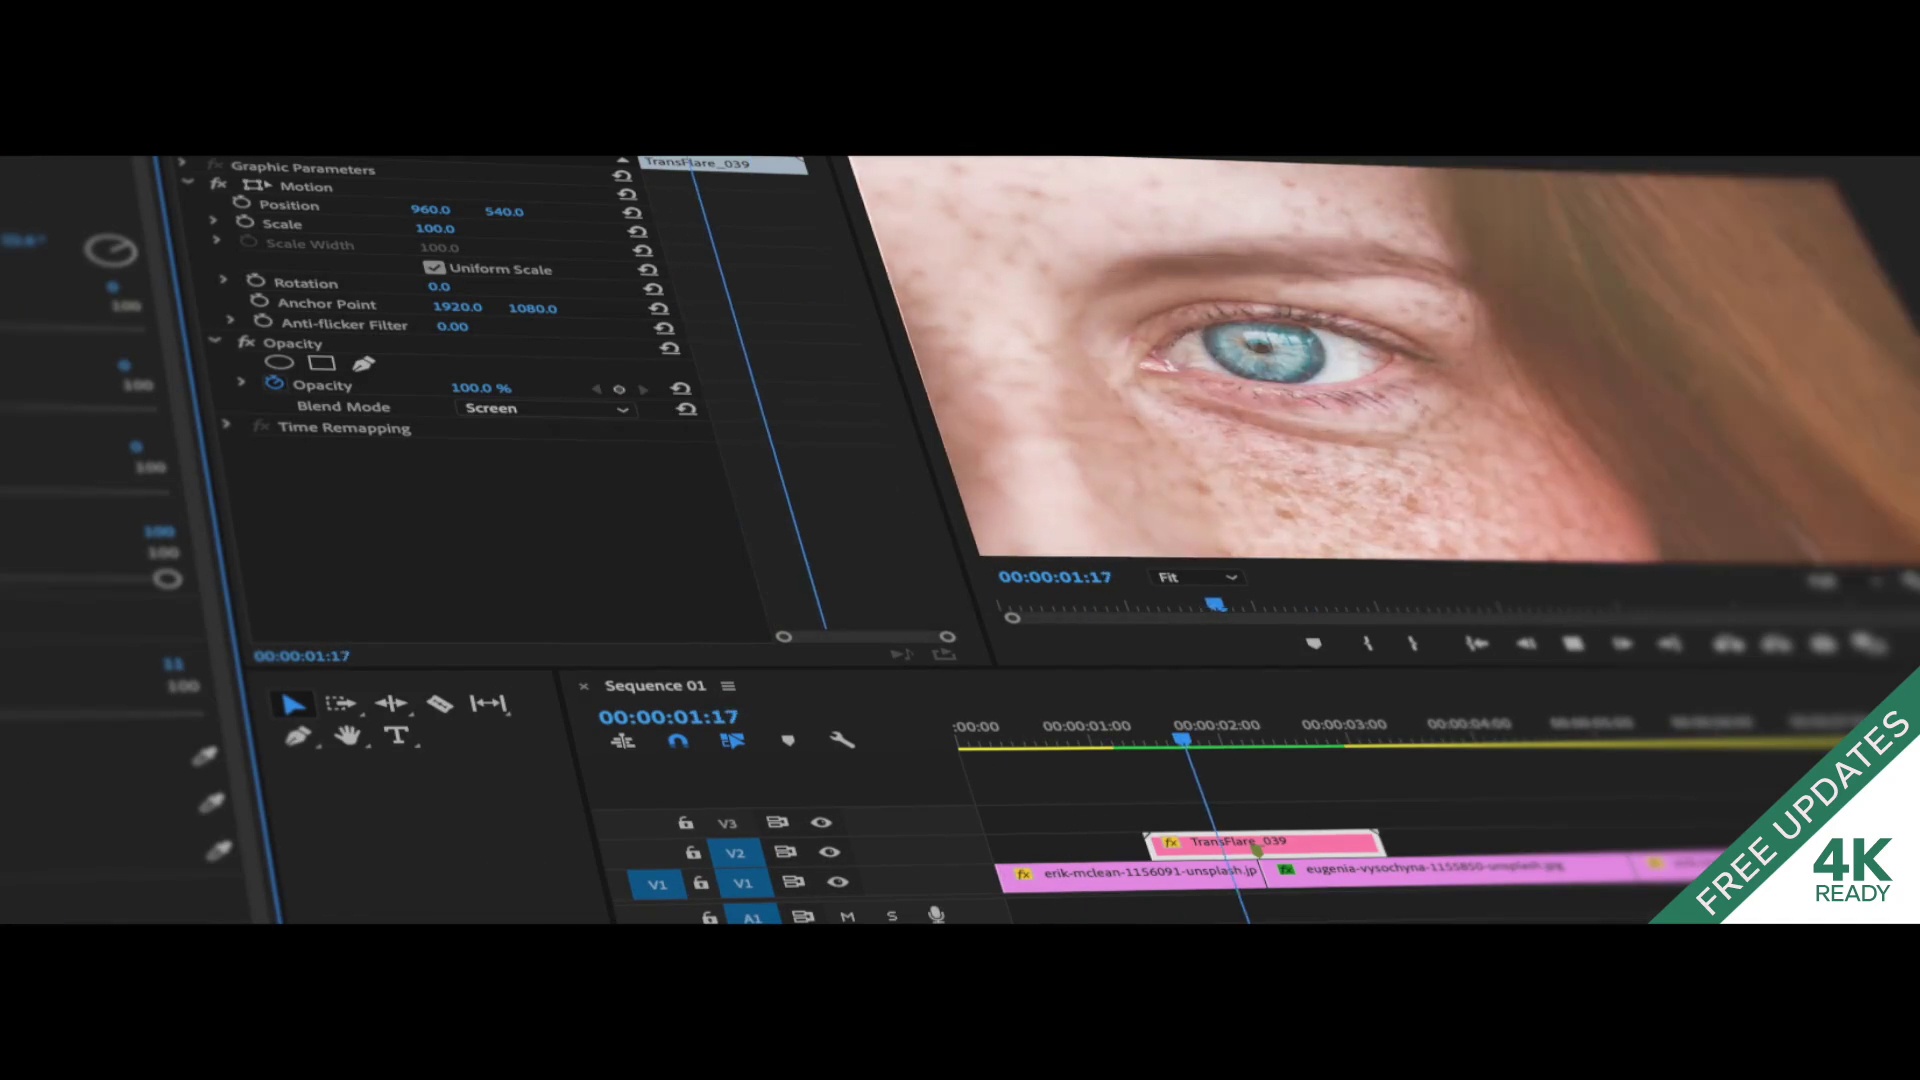 adobe premiere hollywood effects free download software